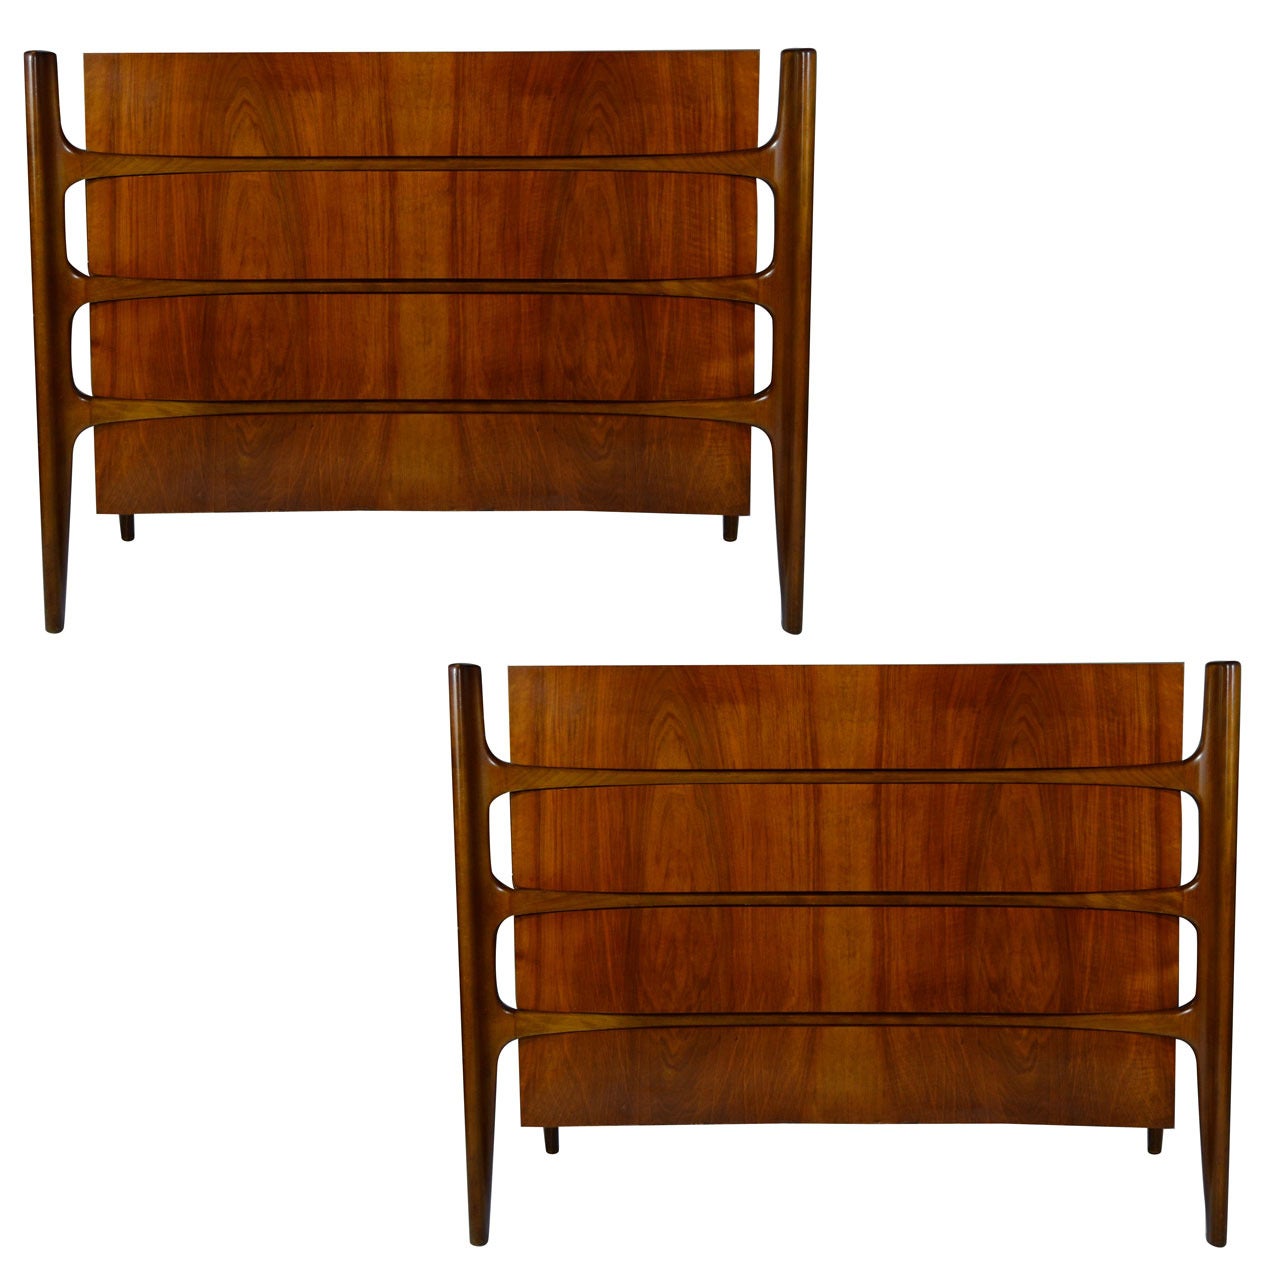 Pair of Modern Rosewood Chests of Drawers by Edmund J. Spence